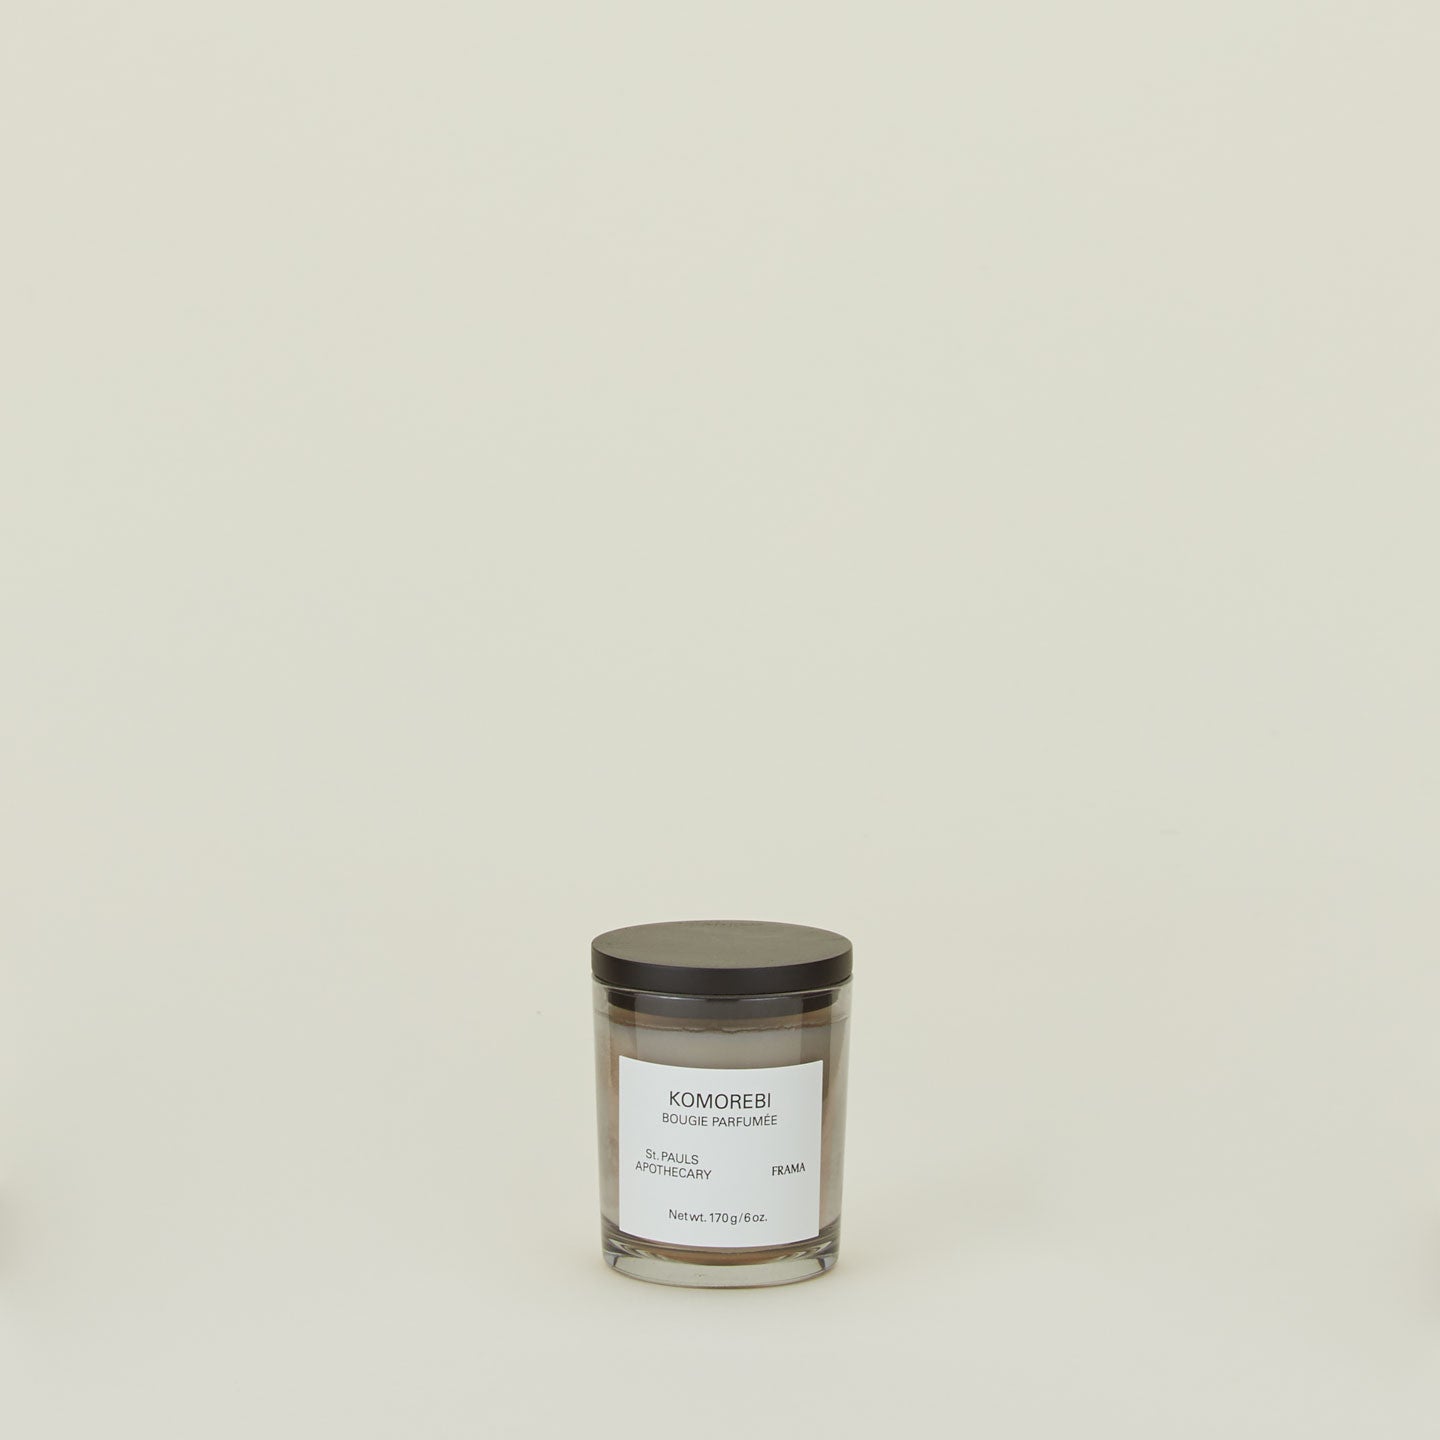 A wax candle with the scent Komorebi. 